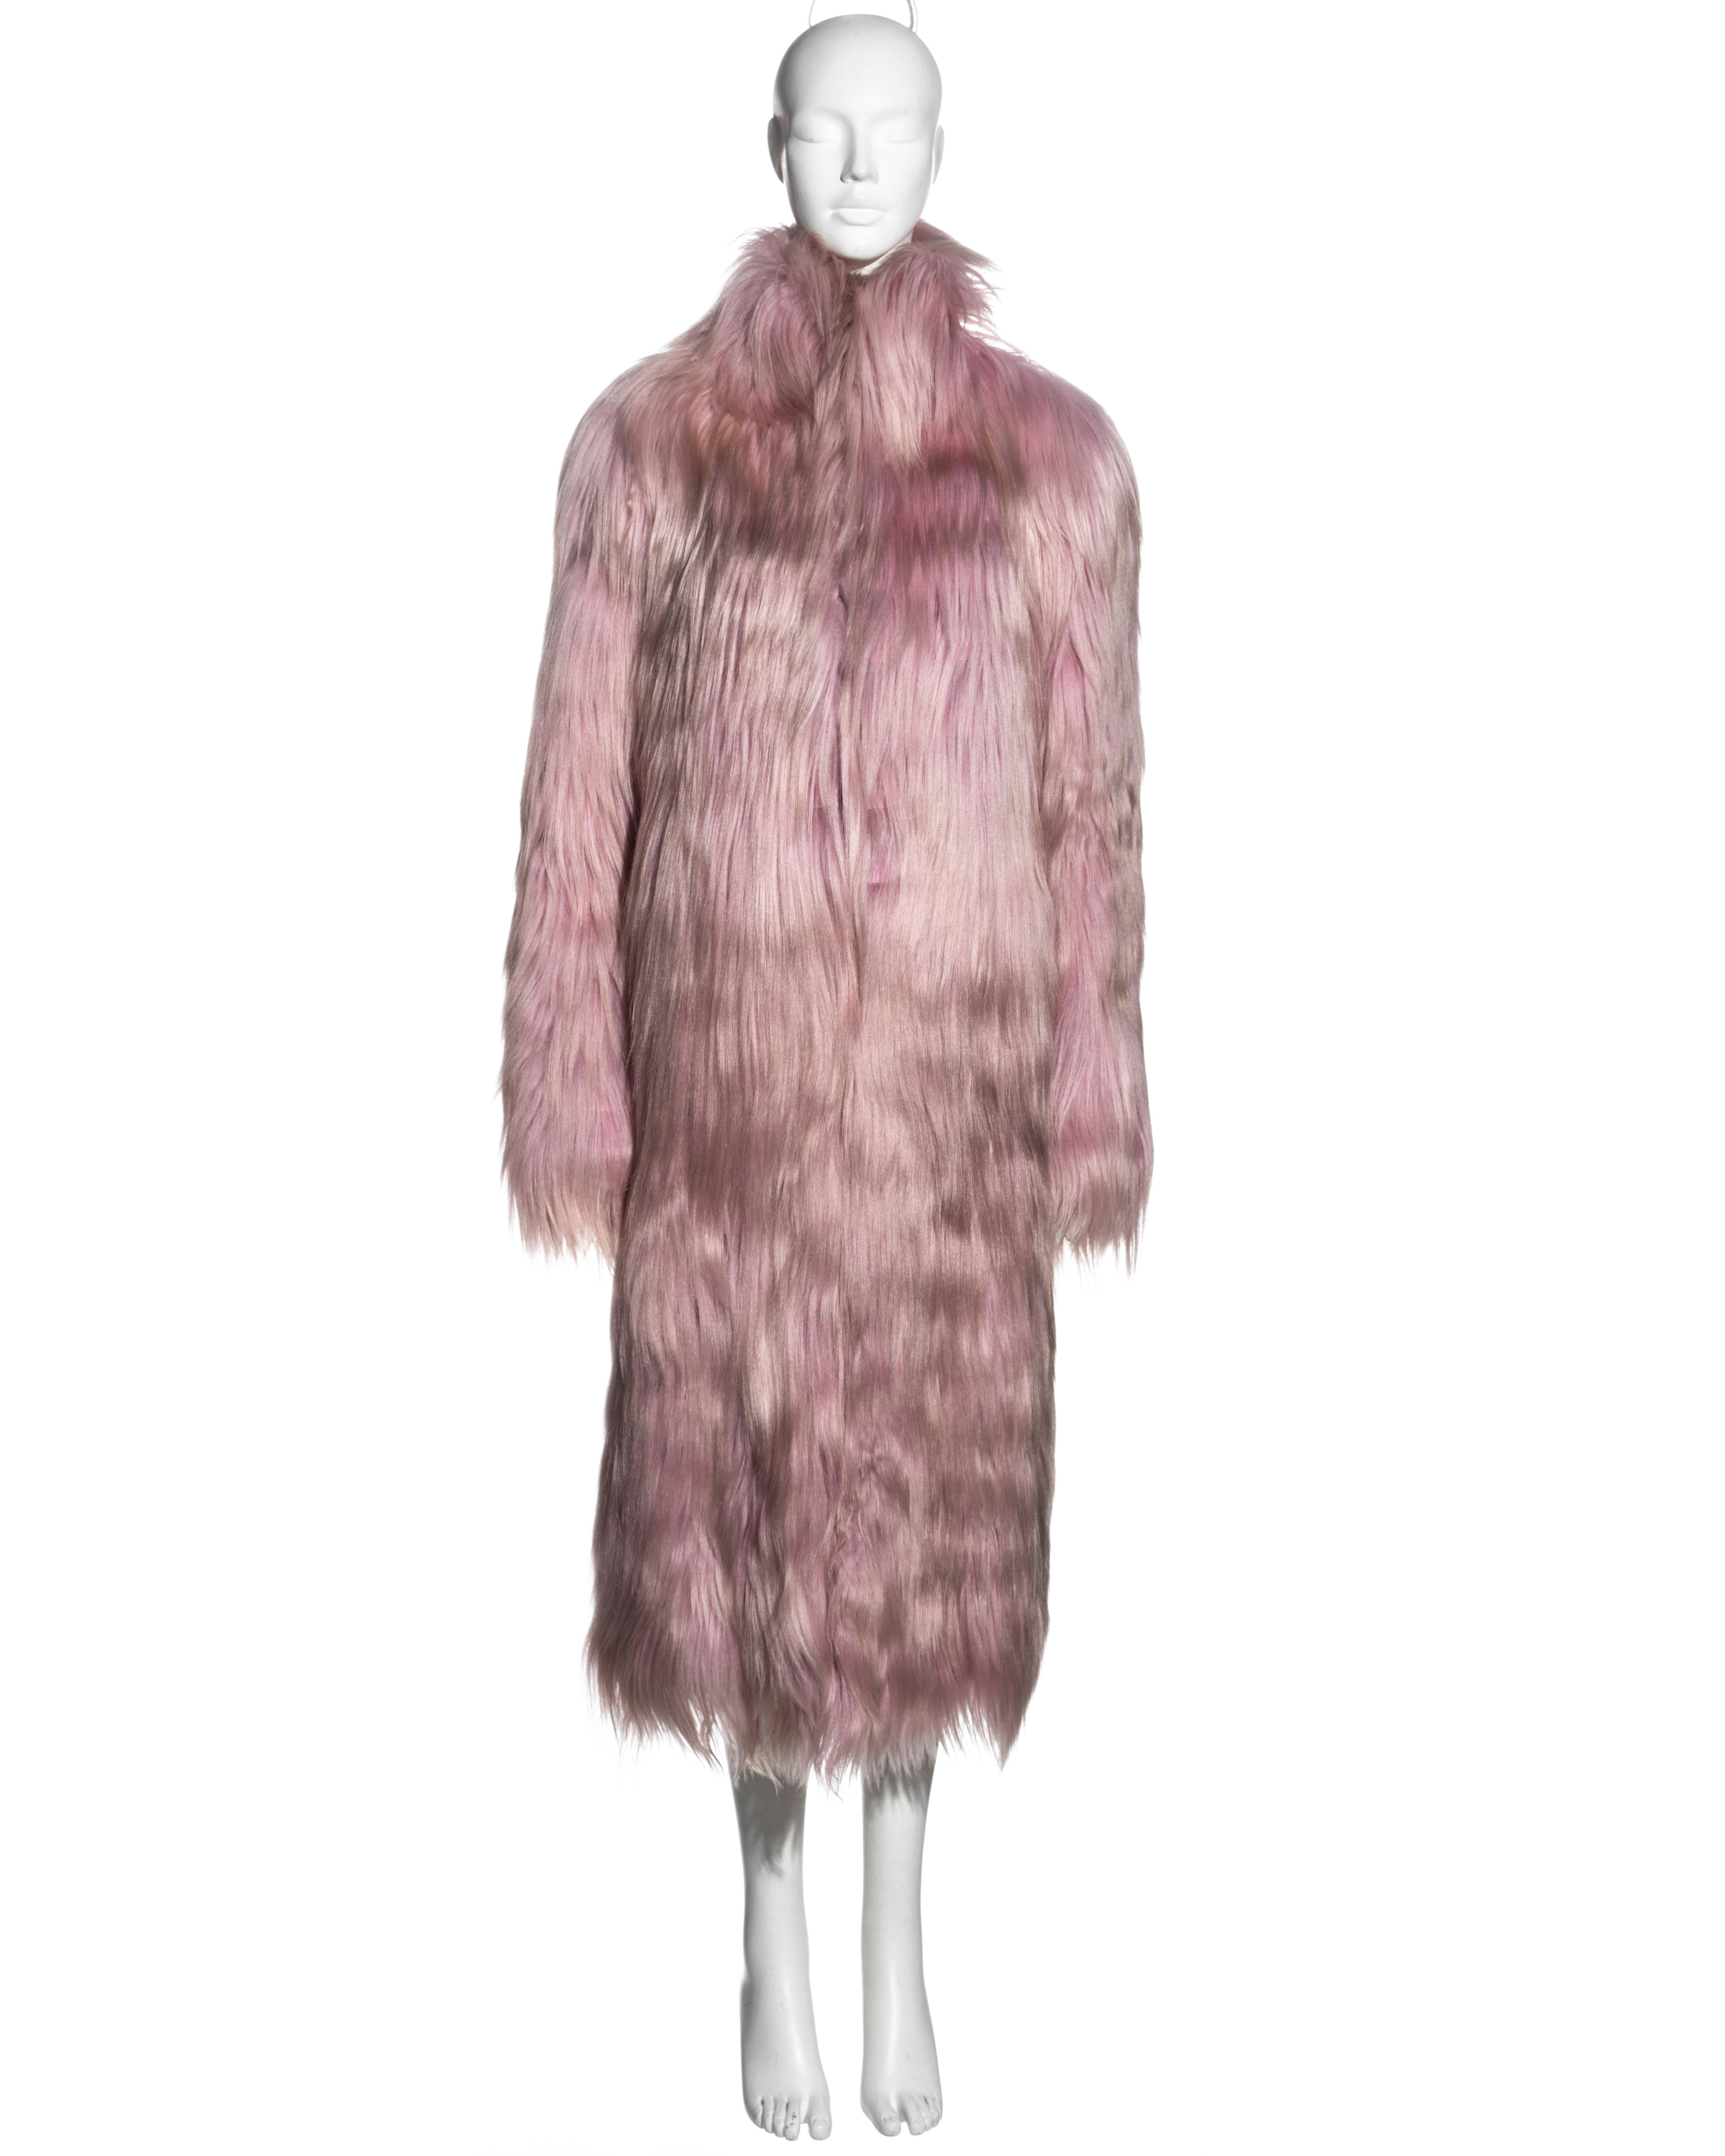 ▪ Rare Gucci oversized fur coat
▪ Designed by Tom Ford 
▪ Pink dyed goat hair 
▪ High neck 
▪ Side slits 
▪ Silk lining 
▪ IT 44 - FR 40 - UK 12
▪ Fall-Winter 2001
▪ Made in Italy